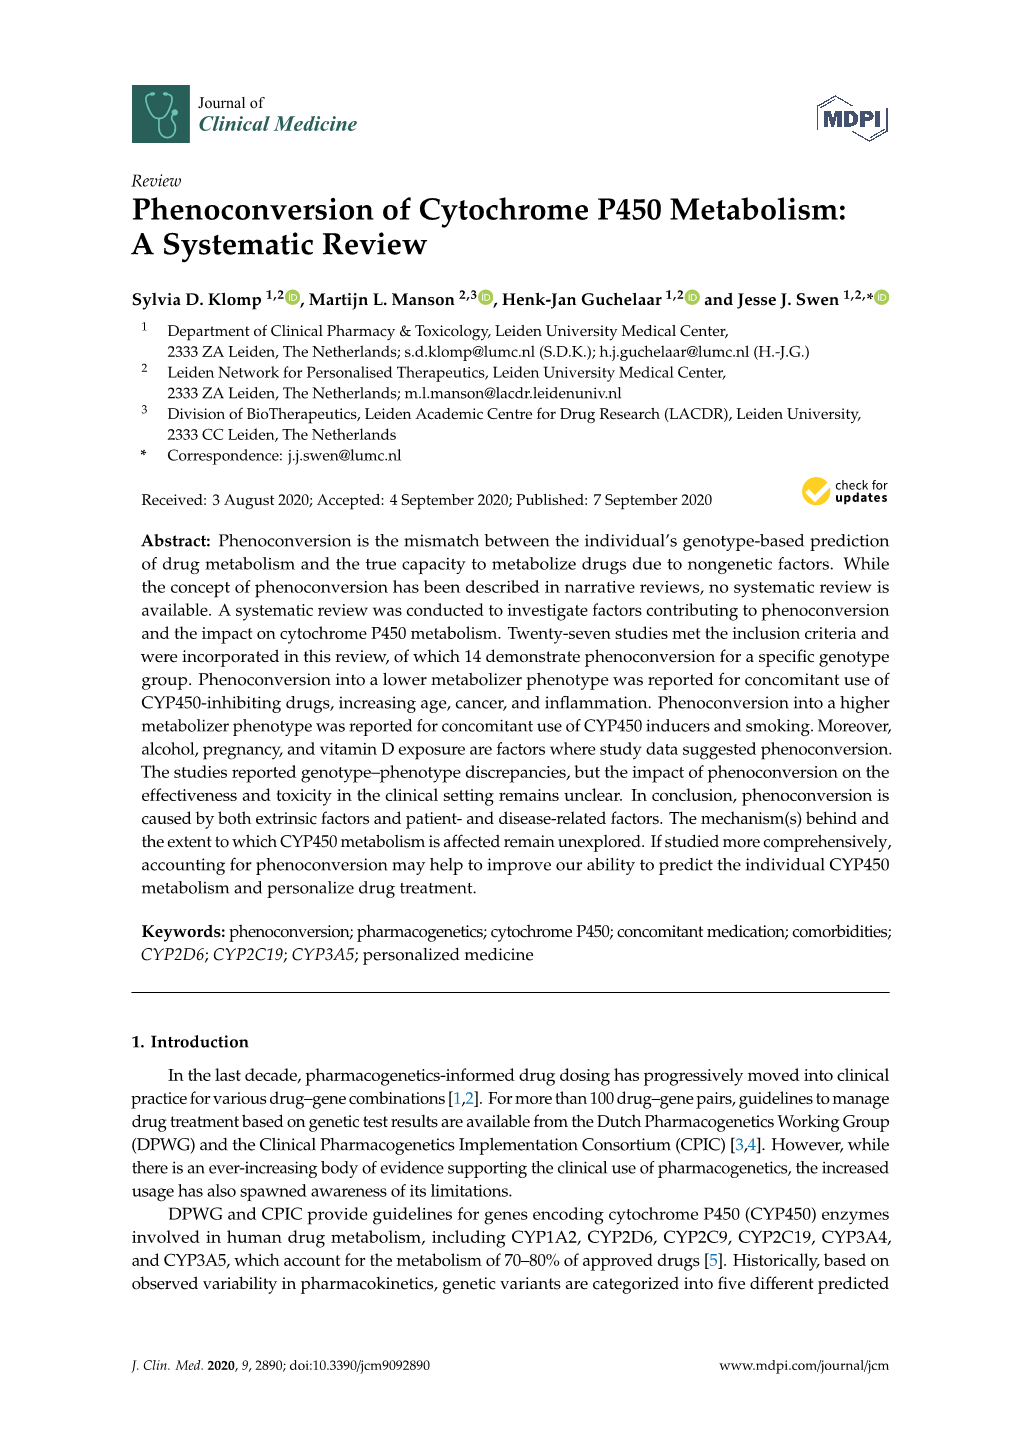 Phenoconversion of Cytochrome P450 Metabolism: a Systematic Review